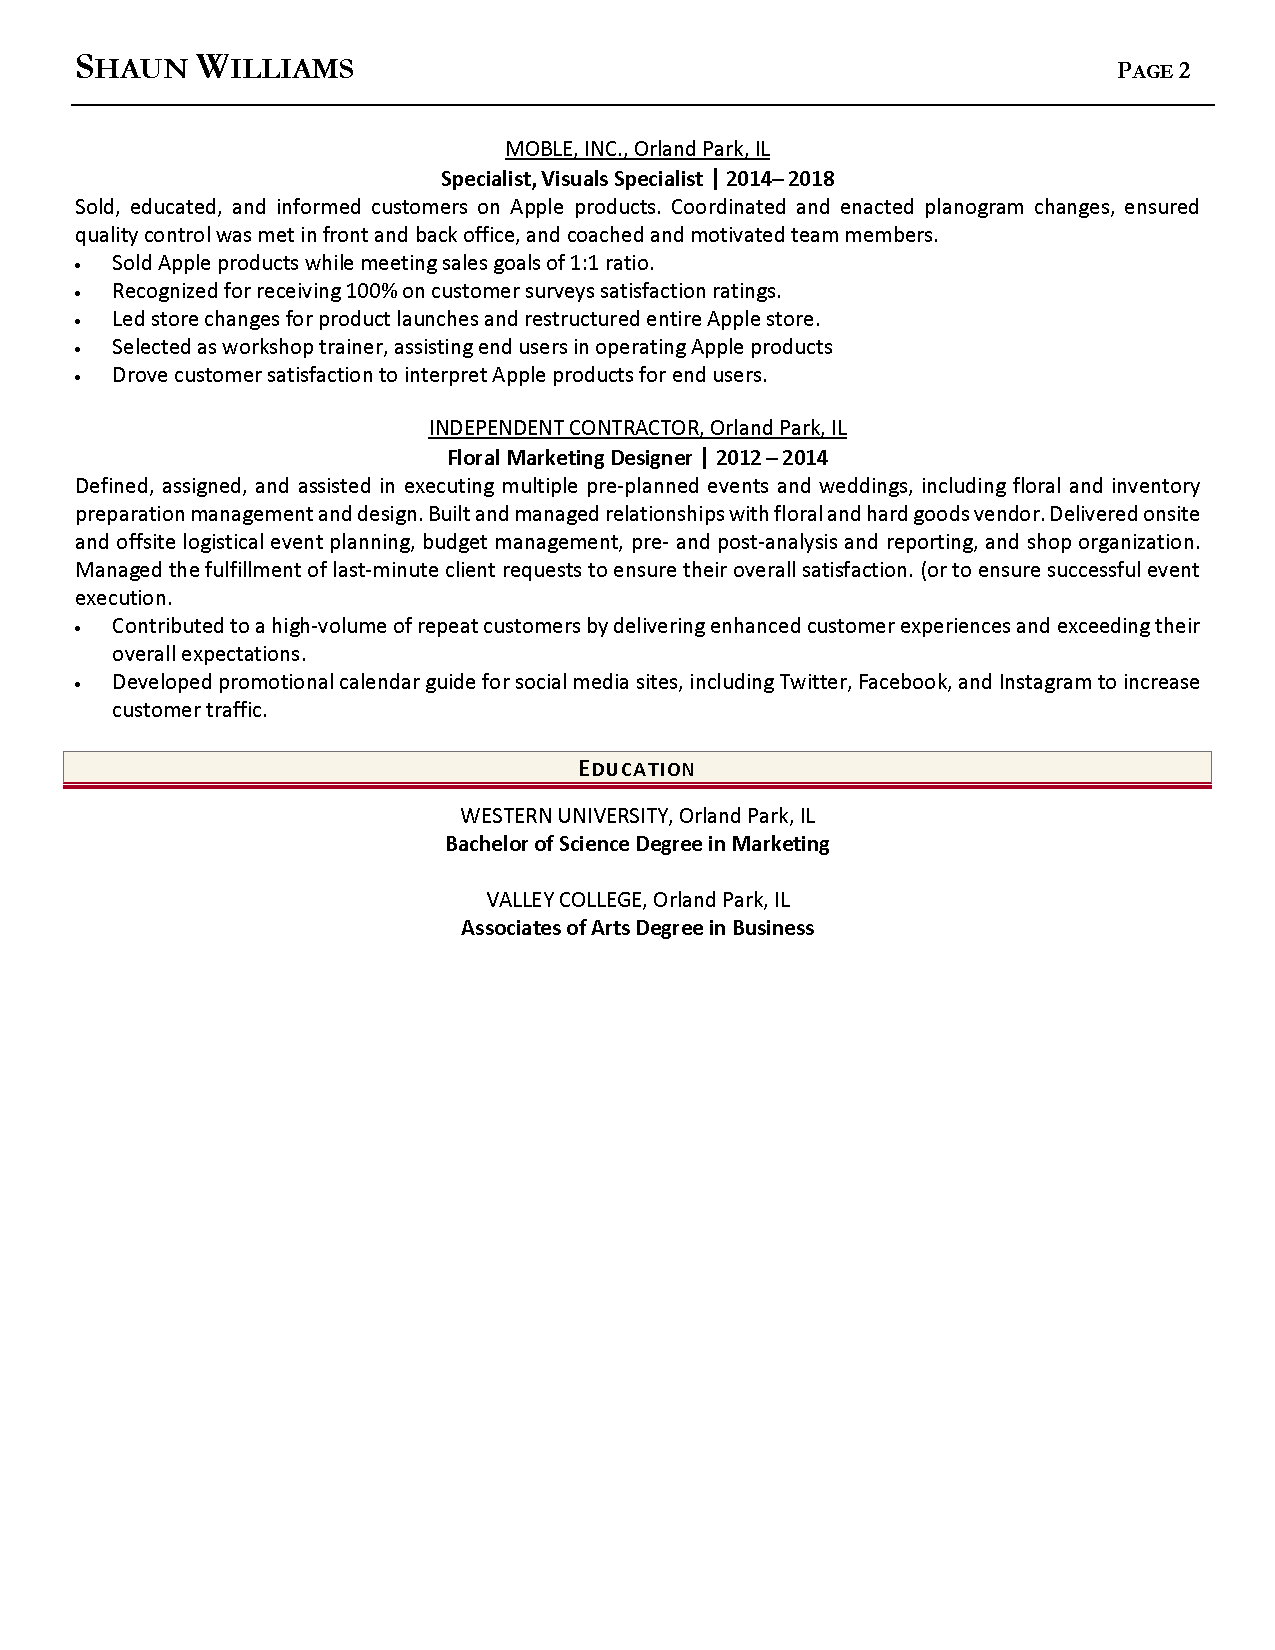 00003 product development manager resume example Page 2